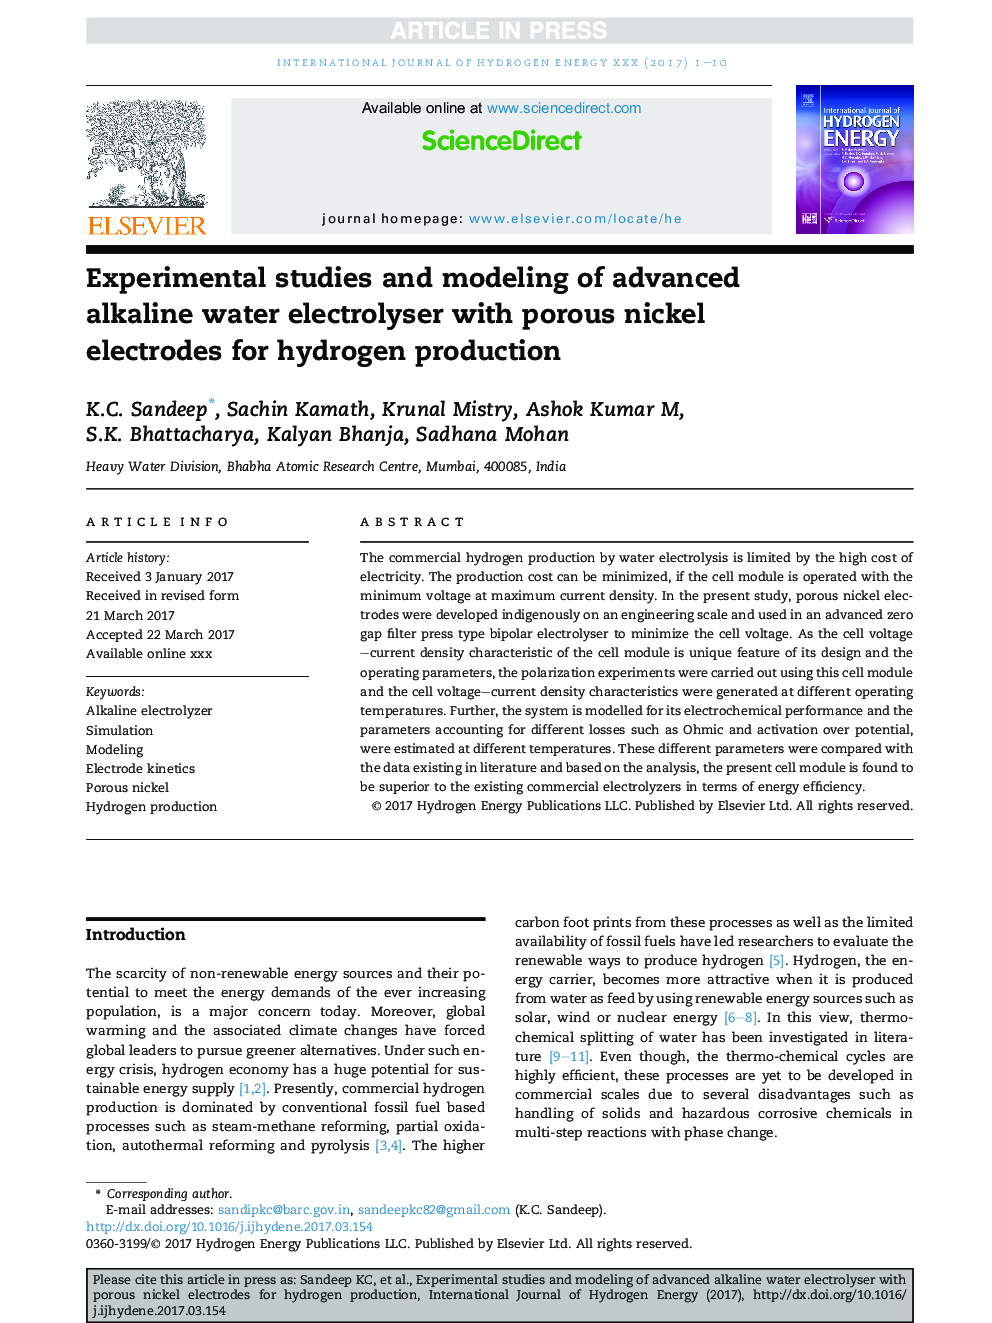 Experimental studies and modeling of advanced alkaline water electrolyser with porous nickel electrodes for hydrogen production